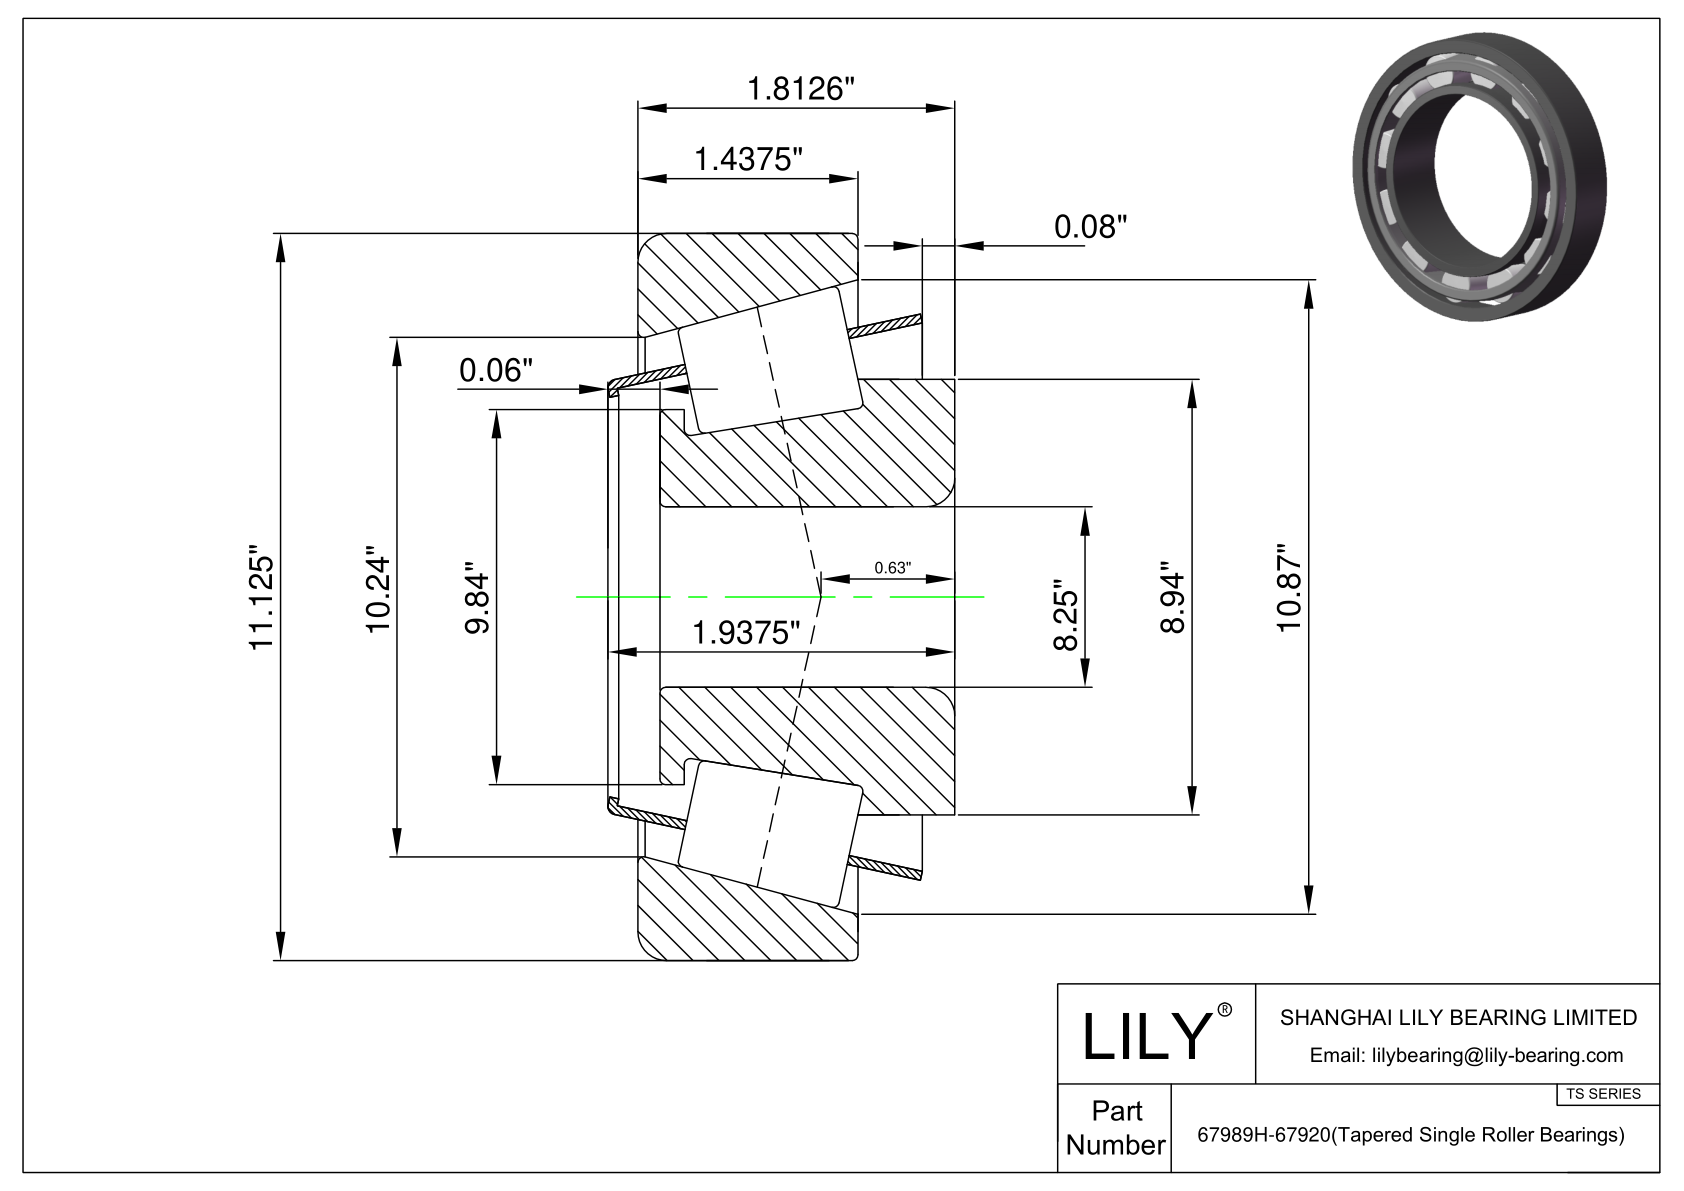 67989H-67920 TS (Tapered Single Roller Bearings) (Imperial) cad drawing